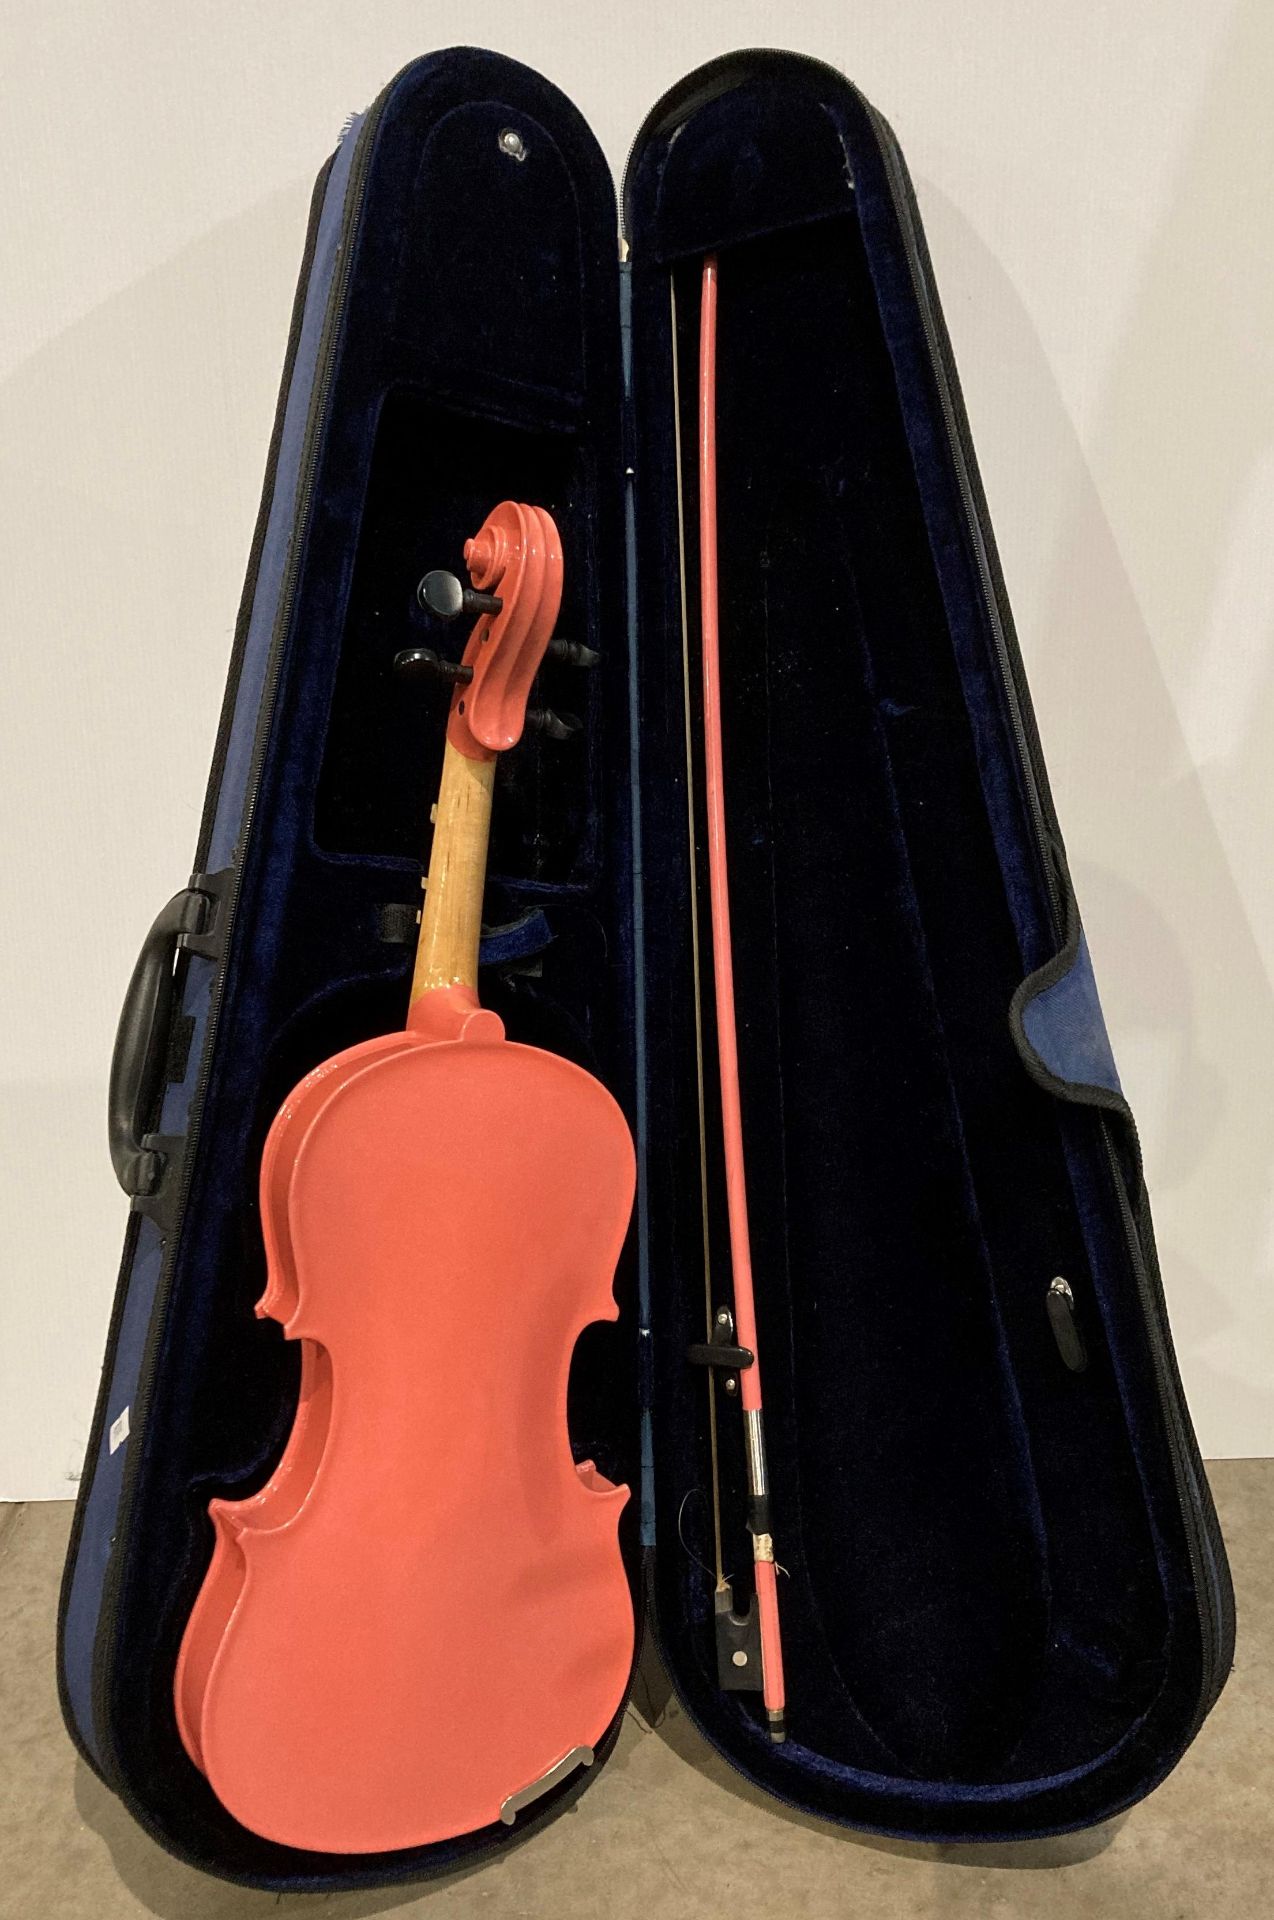 Interstudent learning violin in pink with bow in case (Saleroom location: S3) - Image 2 of 3